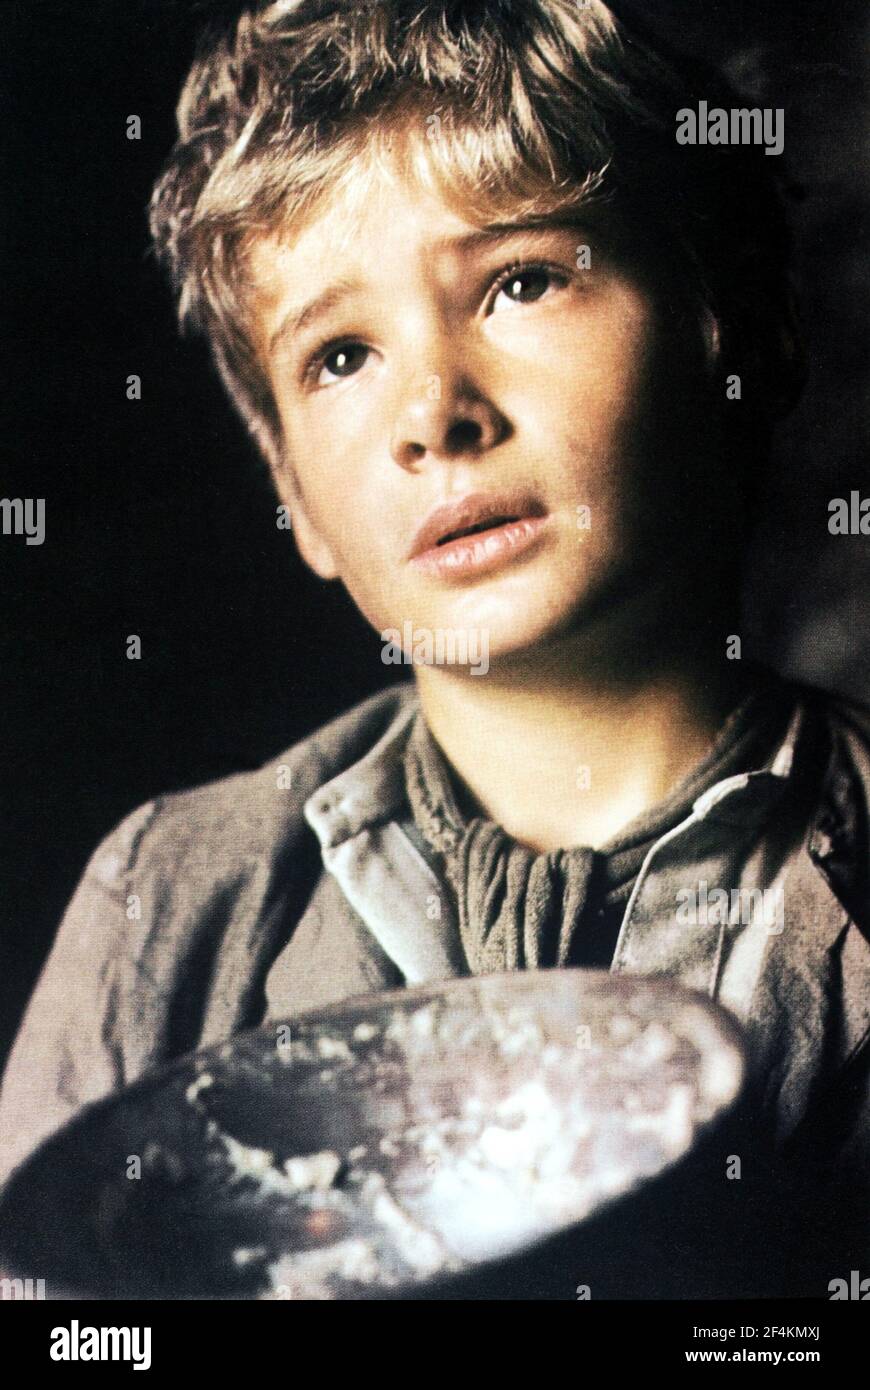 Oliver IMAGE 1 Mark Lester signed ‘Please sir I want some more’ movie photo 